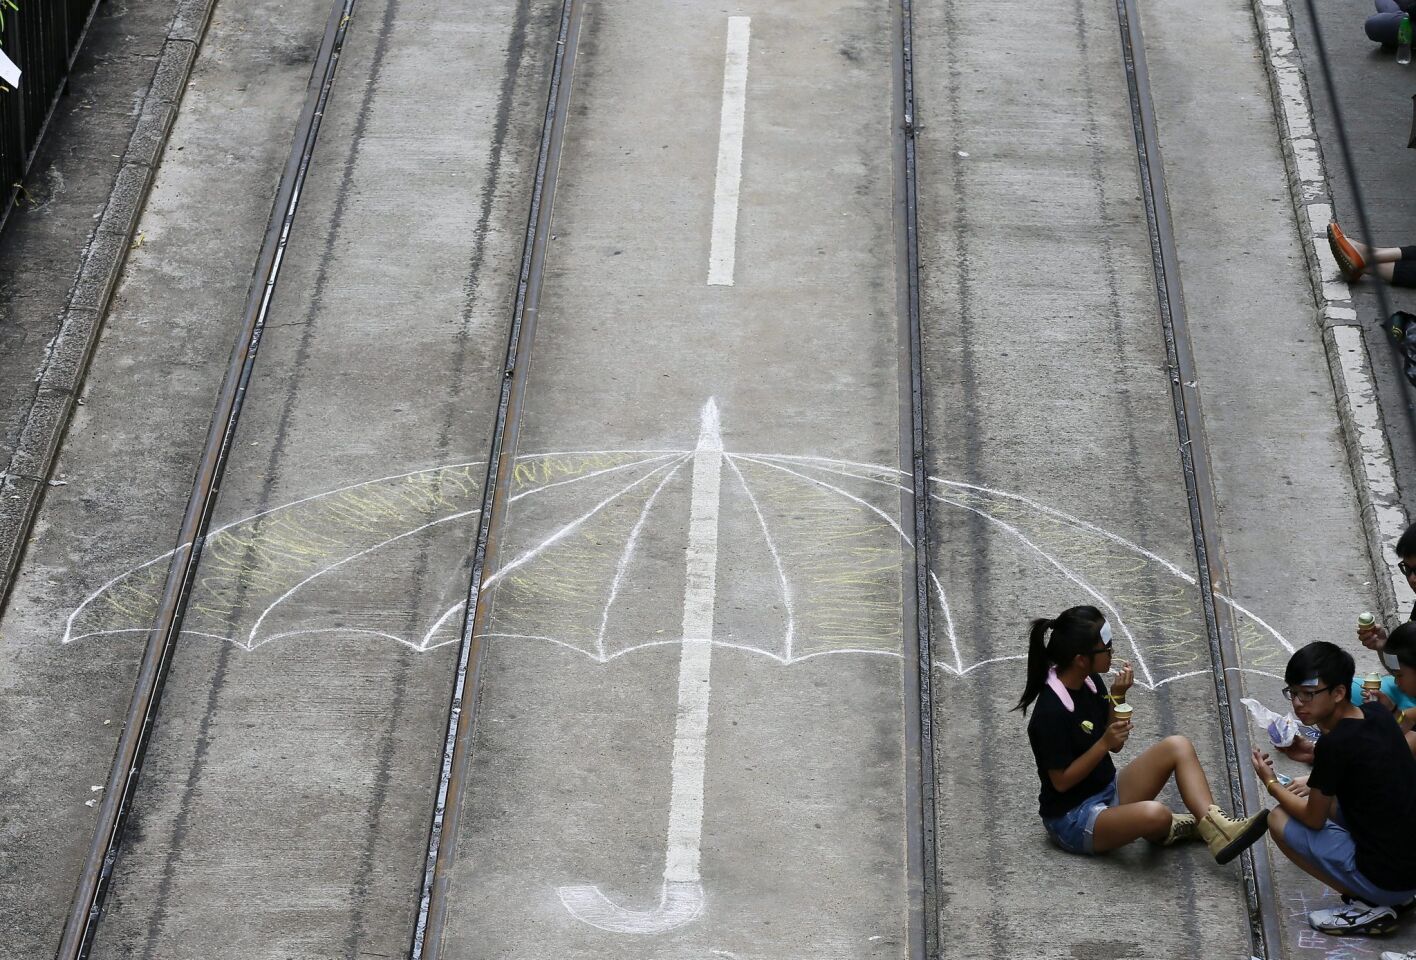 Pro-democracy demonstrators sit on tram tracks with a graffito of an umbrella on the fourth day of the mass civil disobedience campaign in Hong Kong.